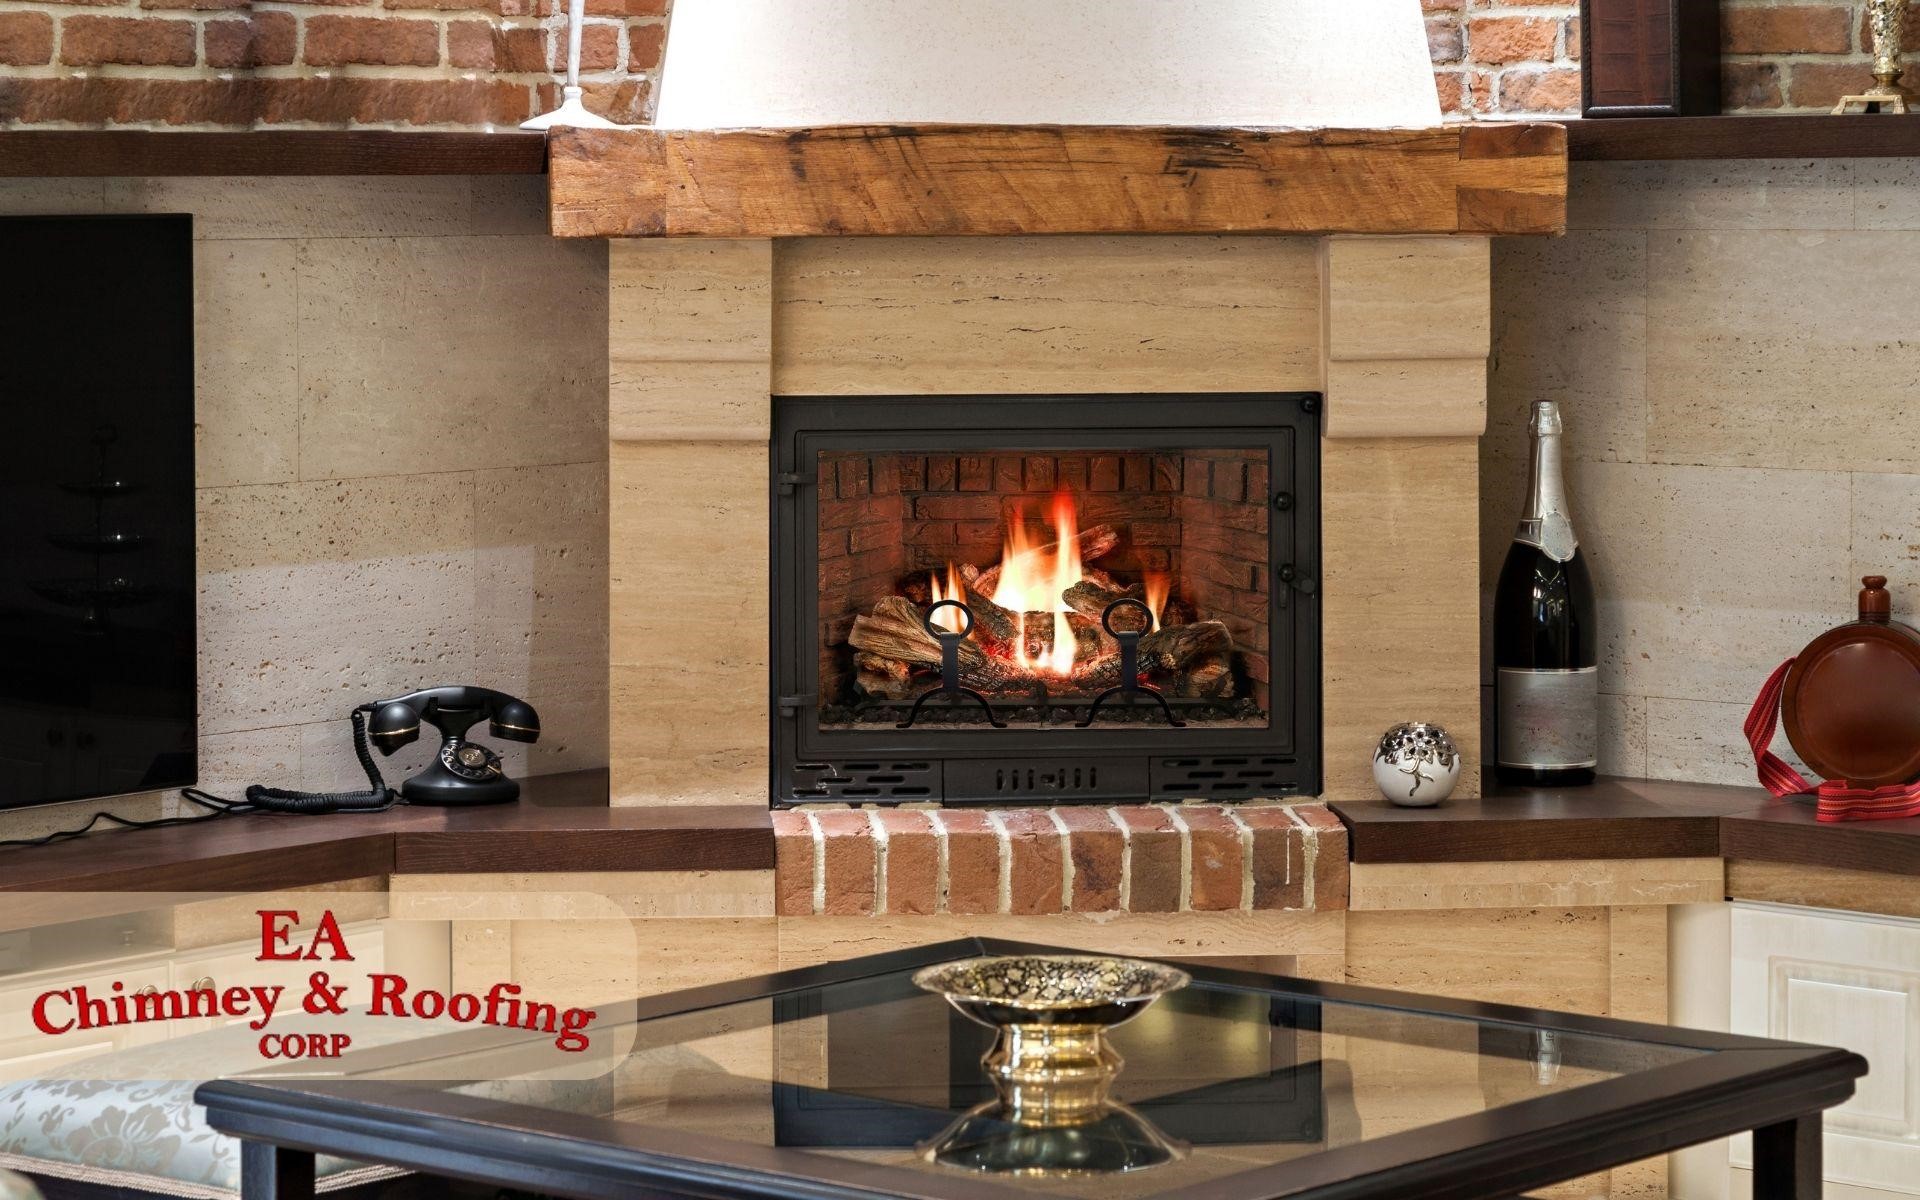 All the information that you need to know about ventless gas fireplaces is here